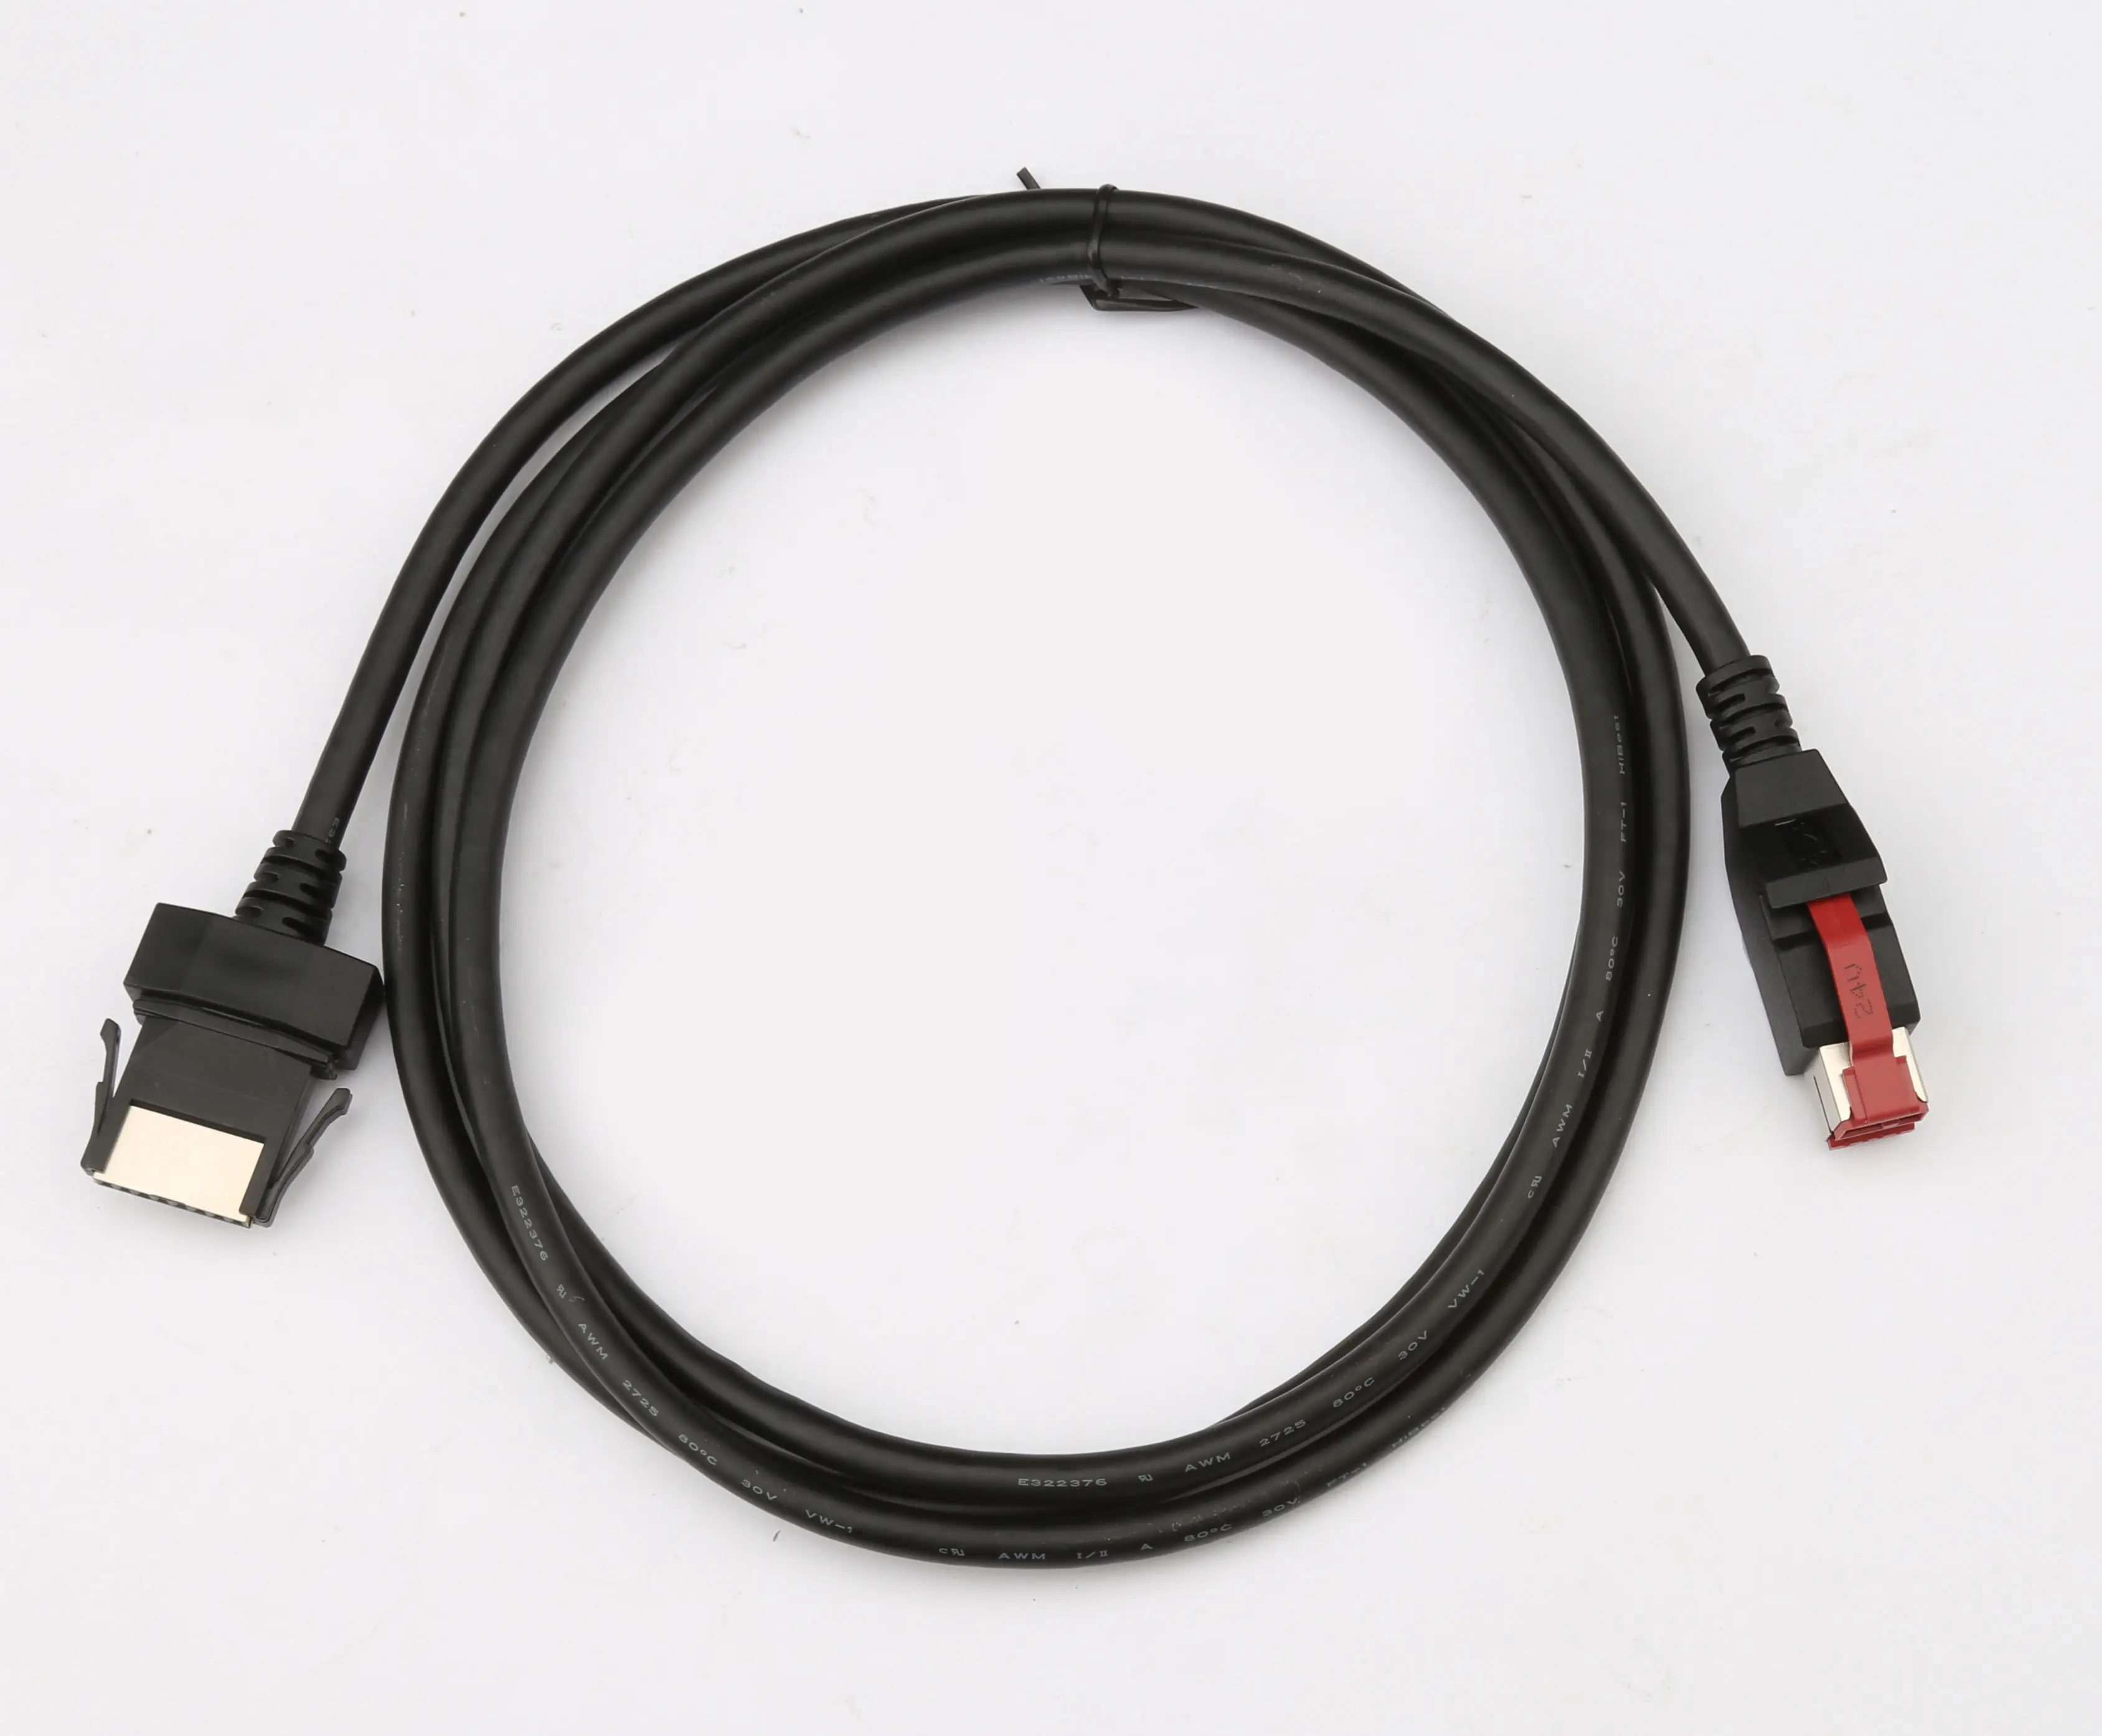 USB power only cable